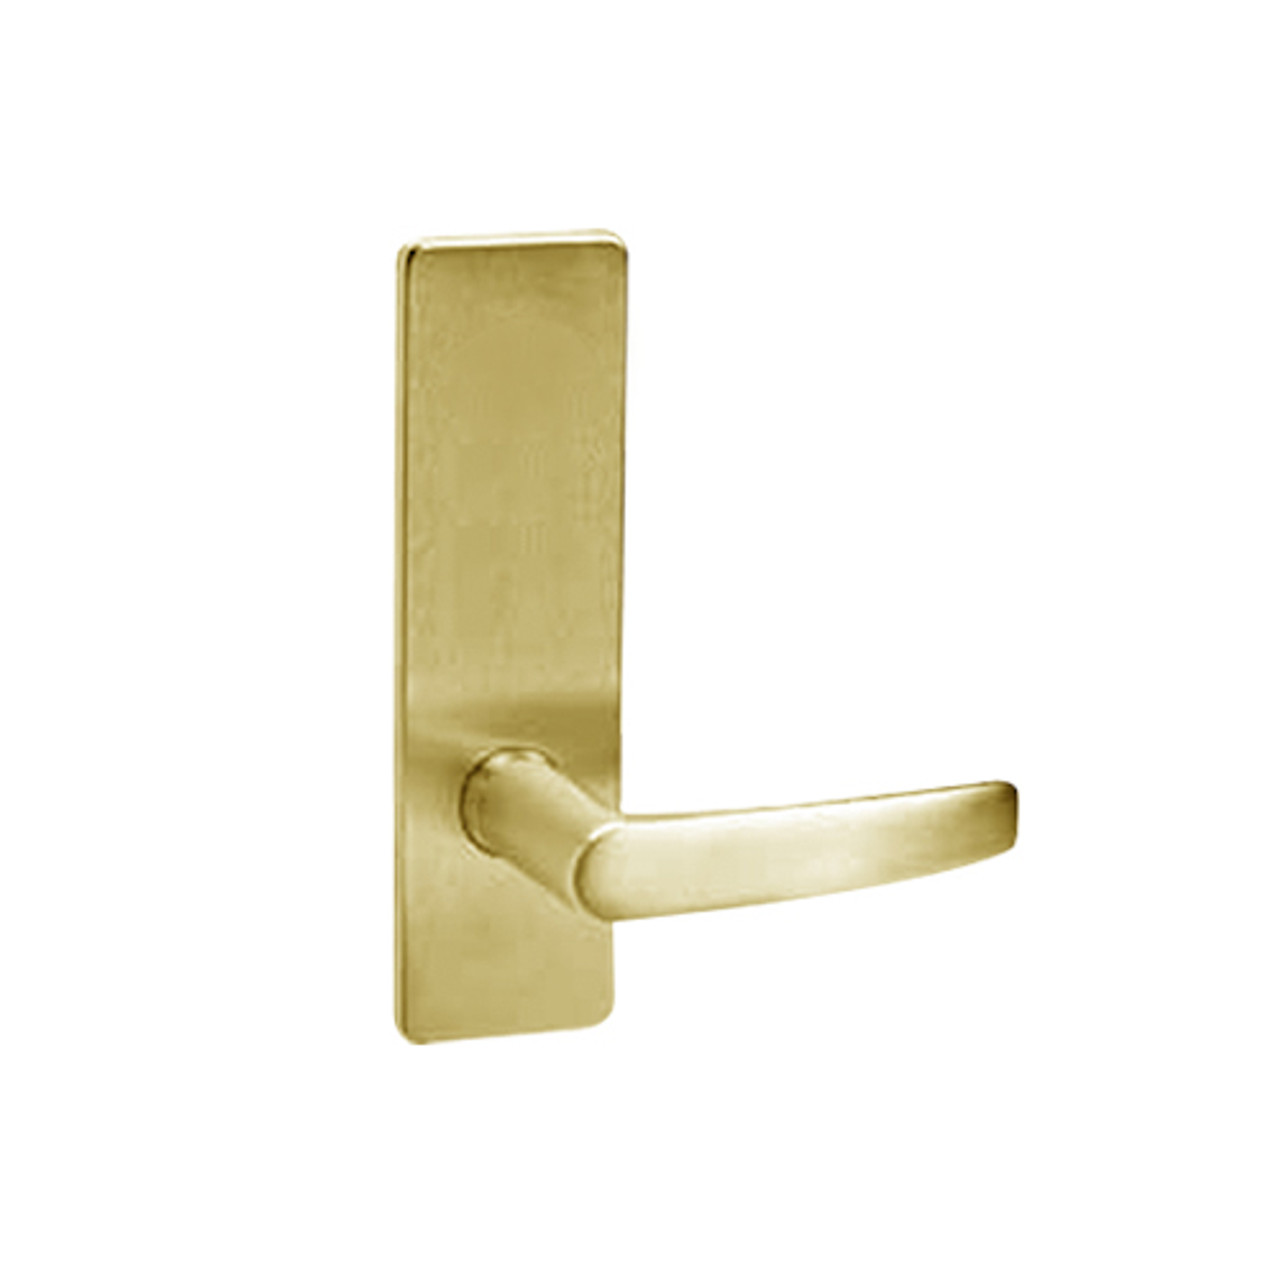 ML2030-ASP-605 Corbin Russwin ML2000 Series Mortise Privacy Locksets with Armstrong Lever in Bright Brass